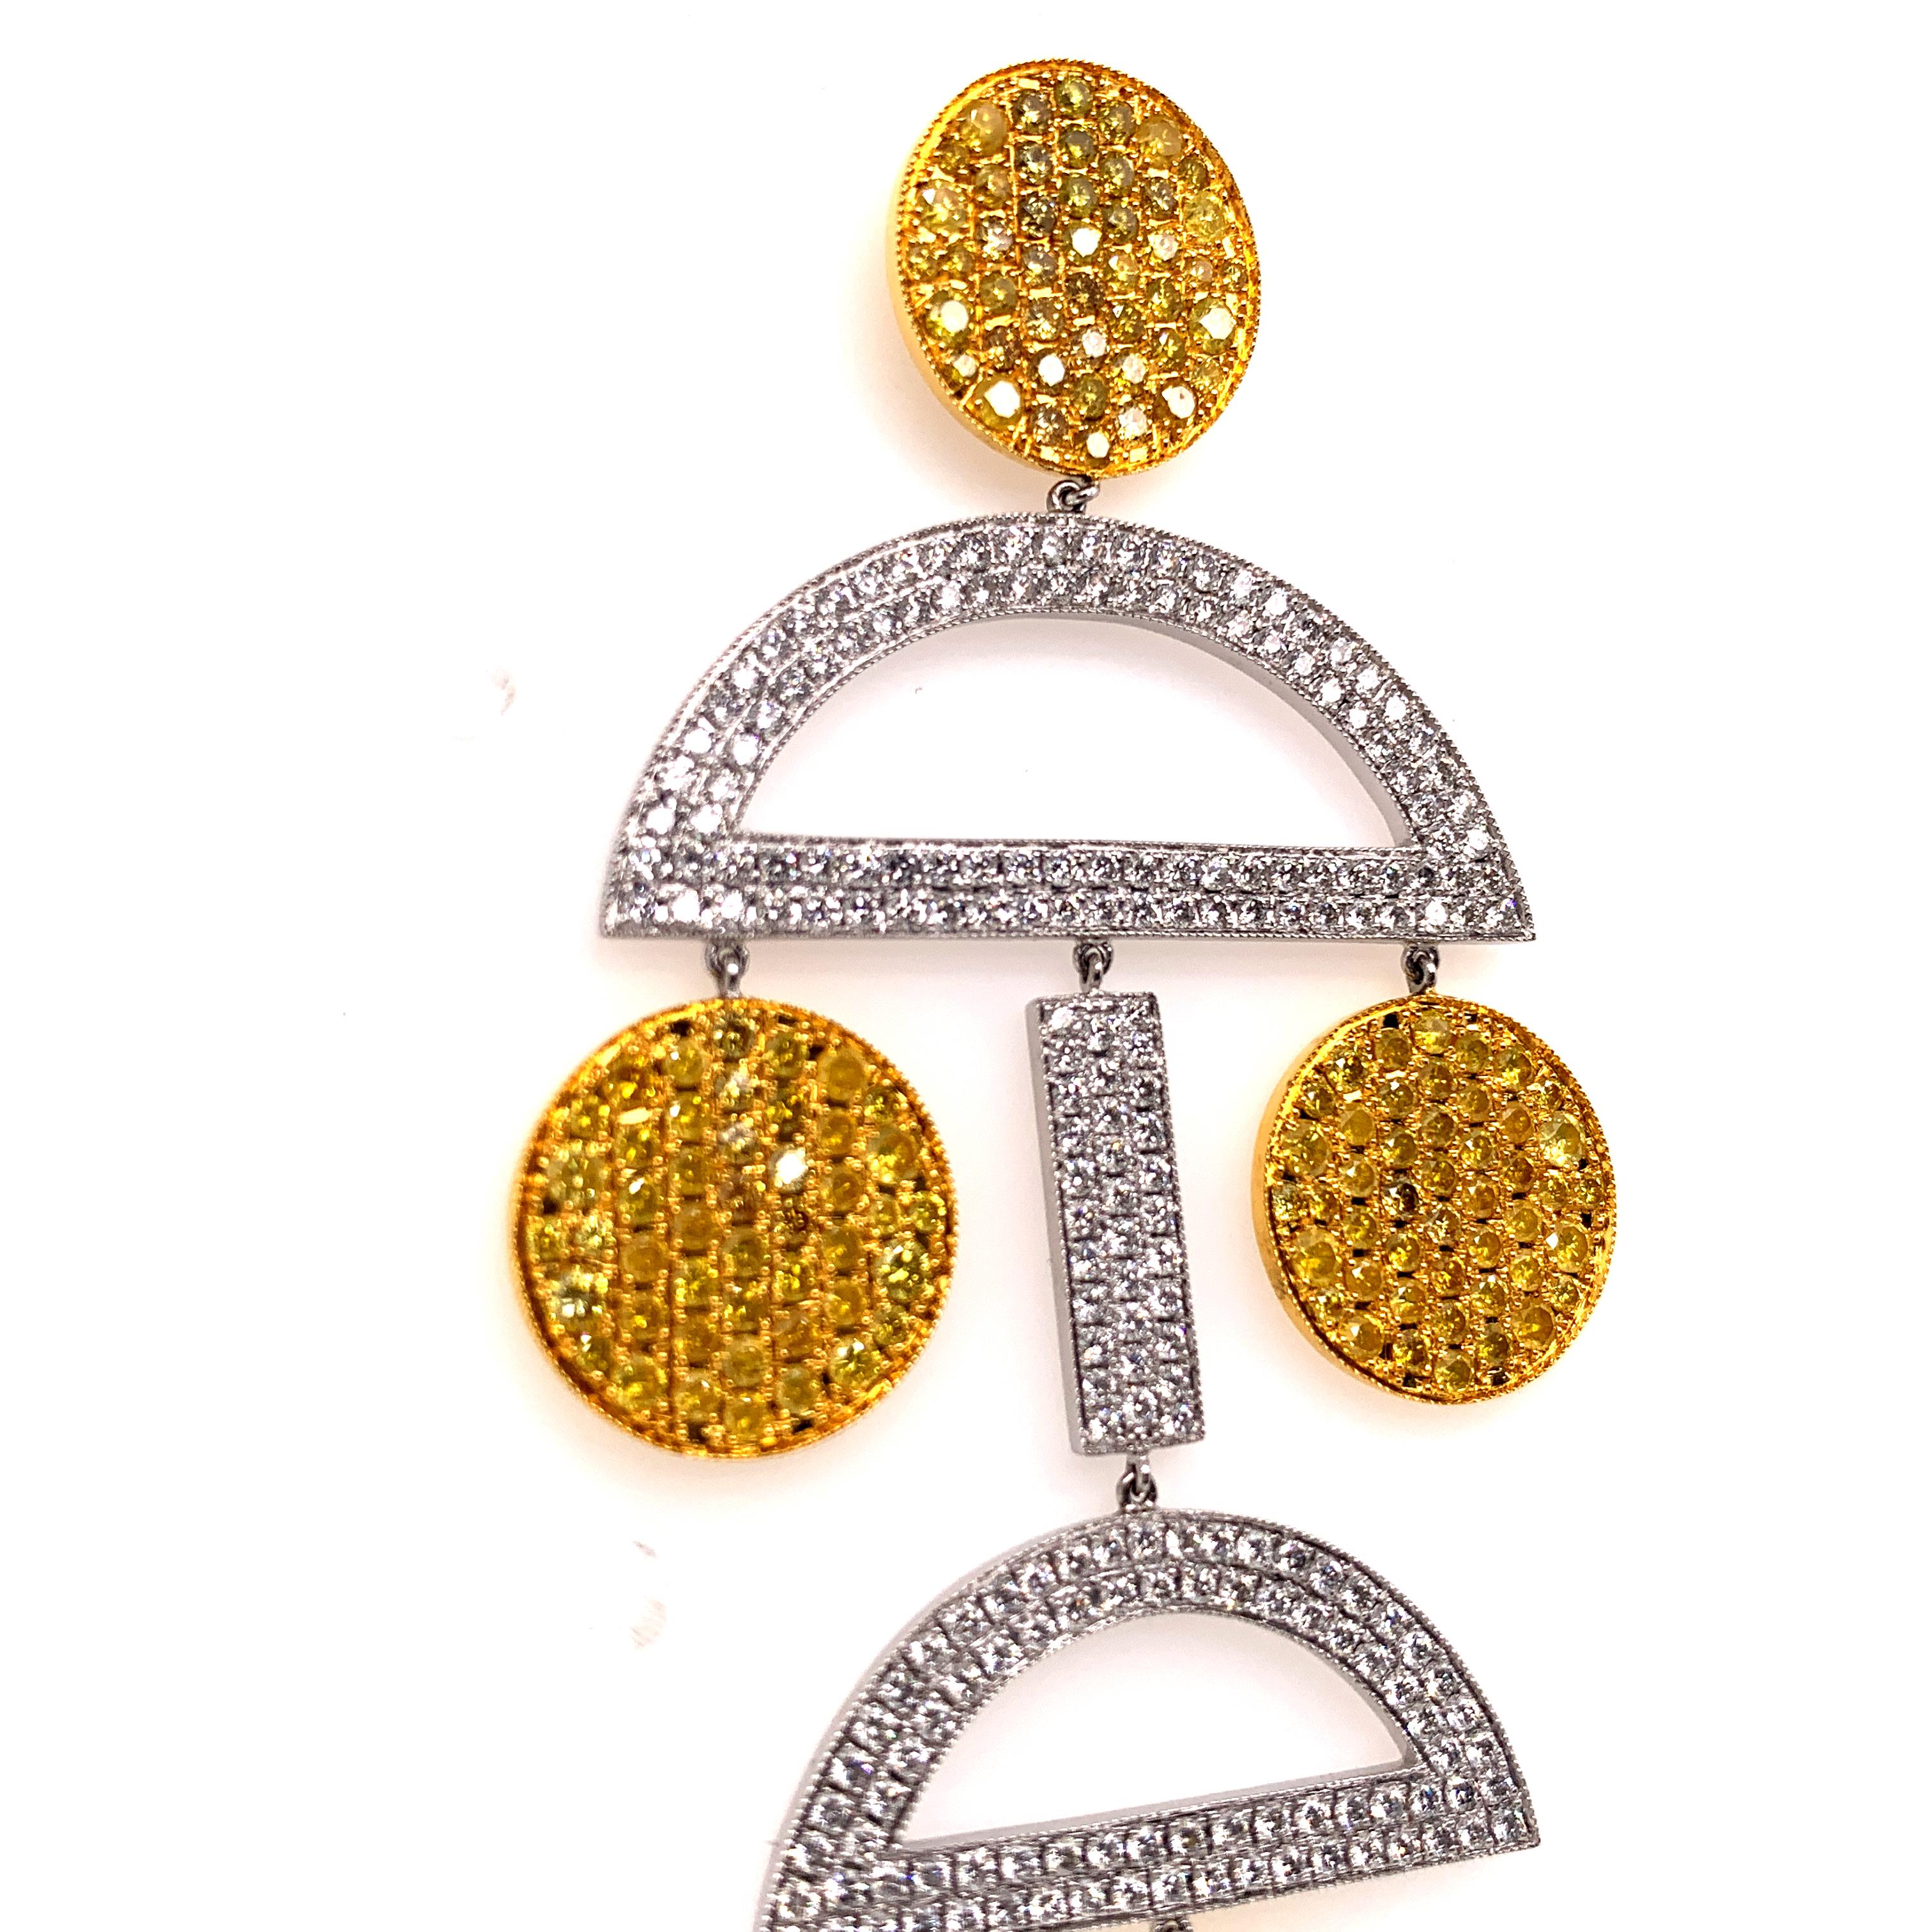 Sophia D, 10.30 Carat White and Yellow Diamond Platinum and Yellow Gold earrings In New Condition For Sale In New York, NY